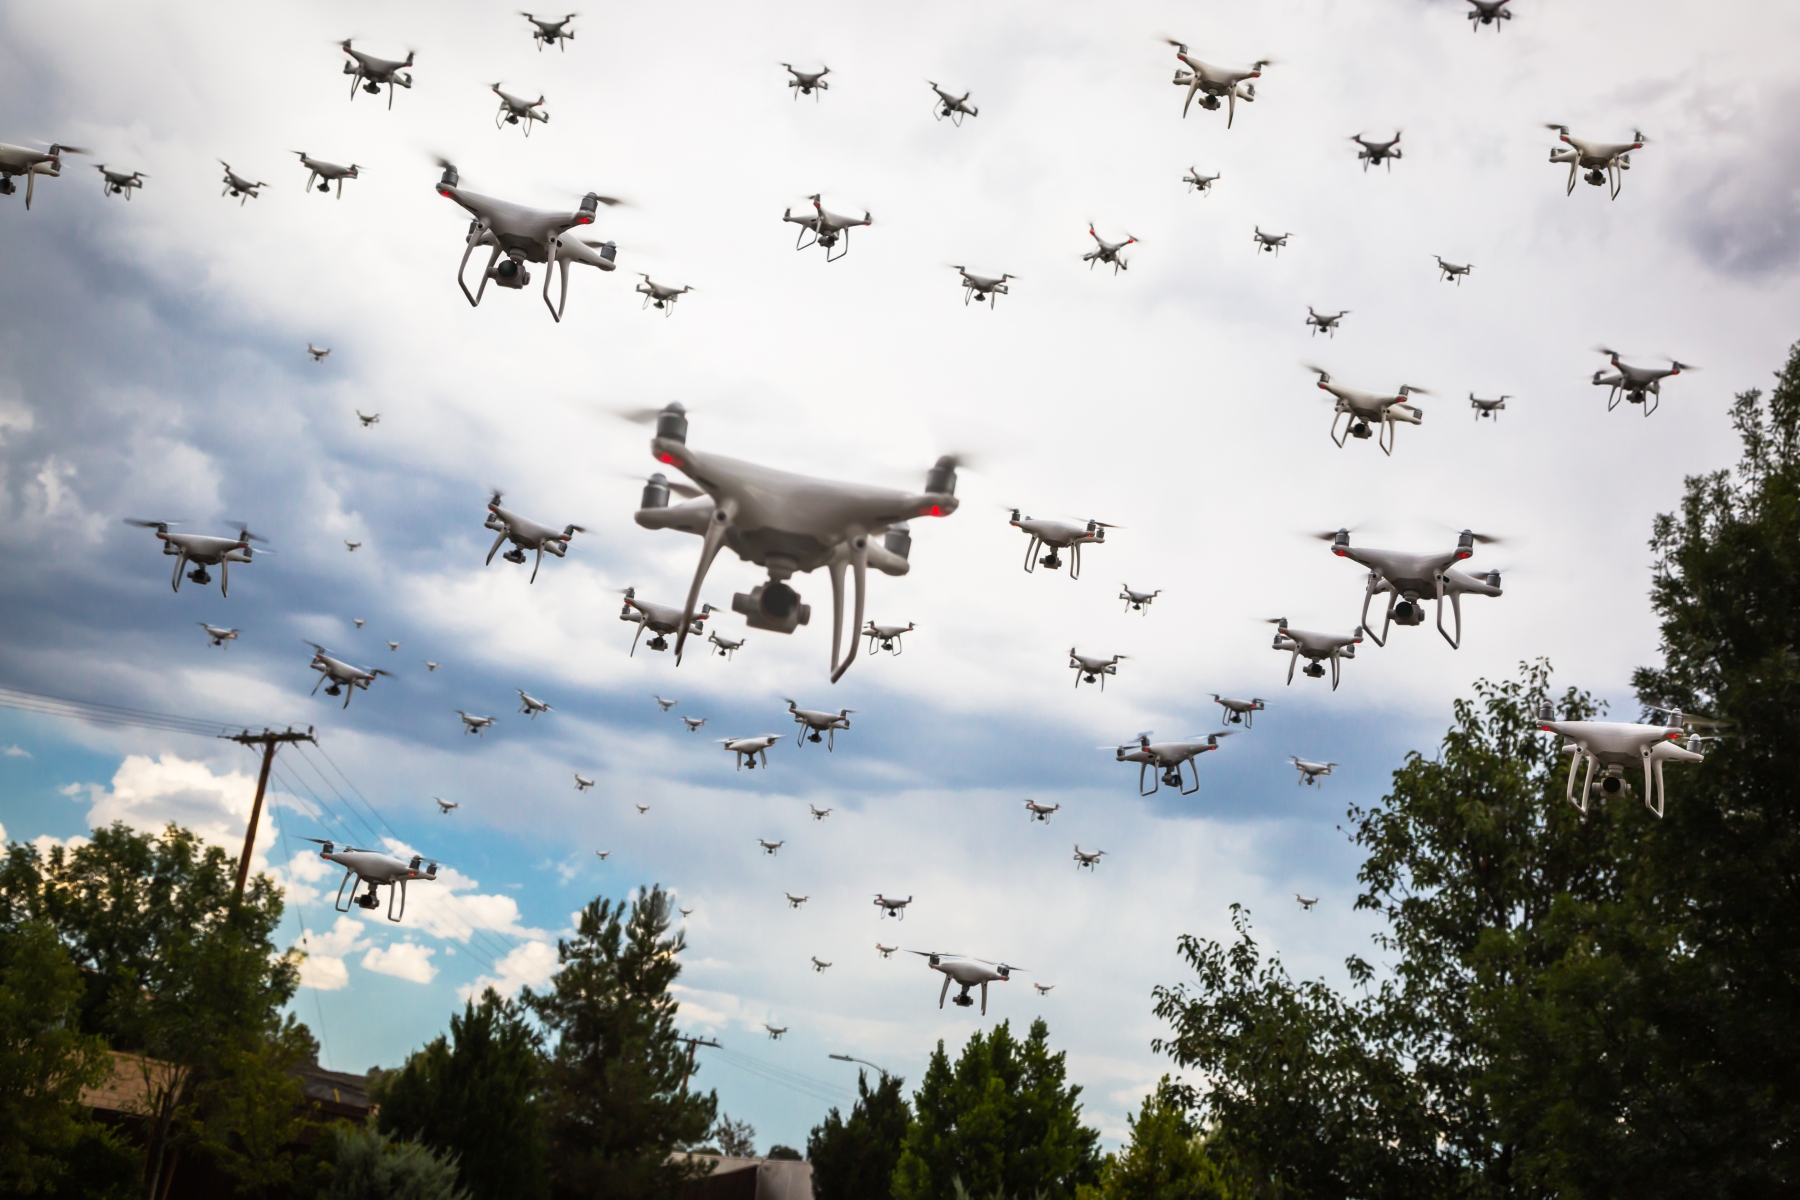 Invasion of the Drones: An exponential increase in capability and reduced costs have made drones a truly disruptive technology (Image credit: Shutterstock)